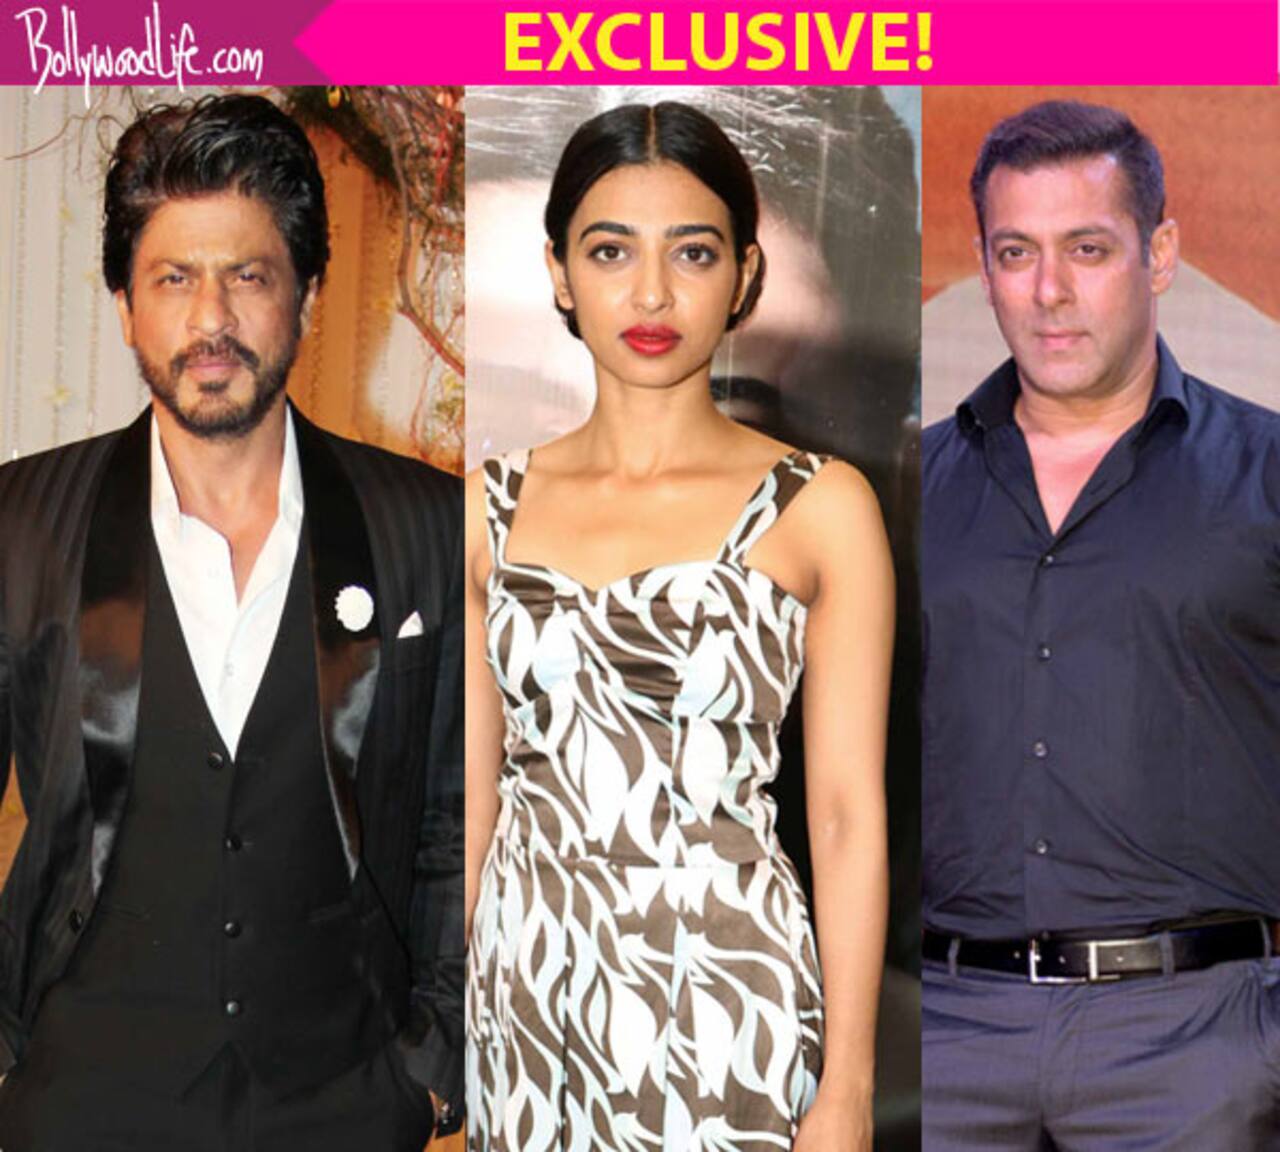 Our rapid fire with Radhika Apte proves that she is a fan of Shah Rukh Khan and NOT Salman Khan-watch EXCLUSIVE interview!